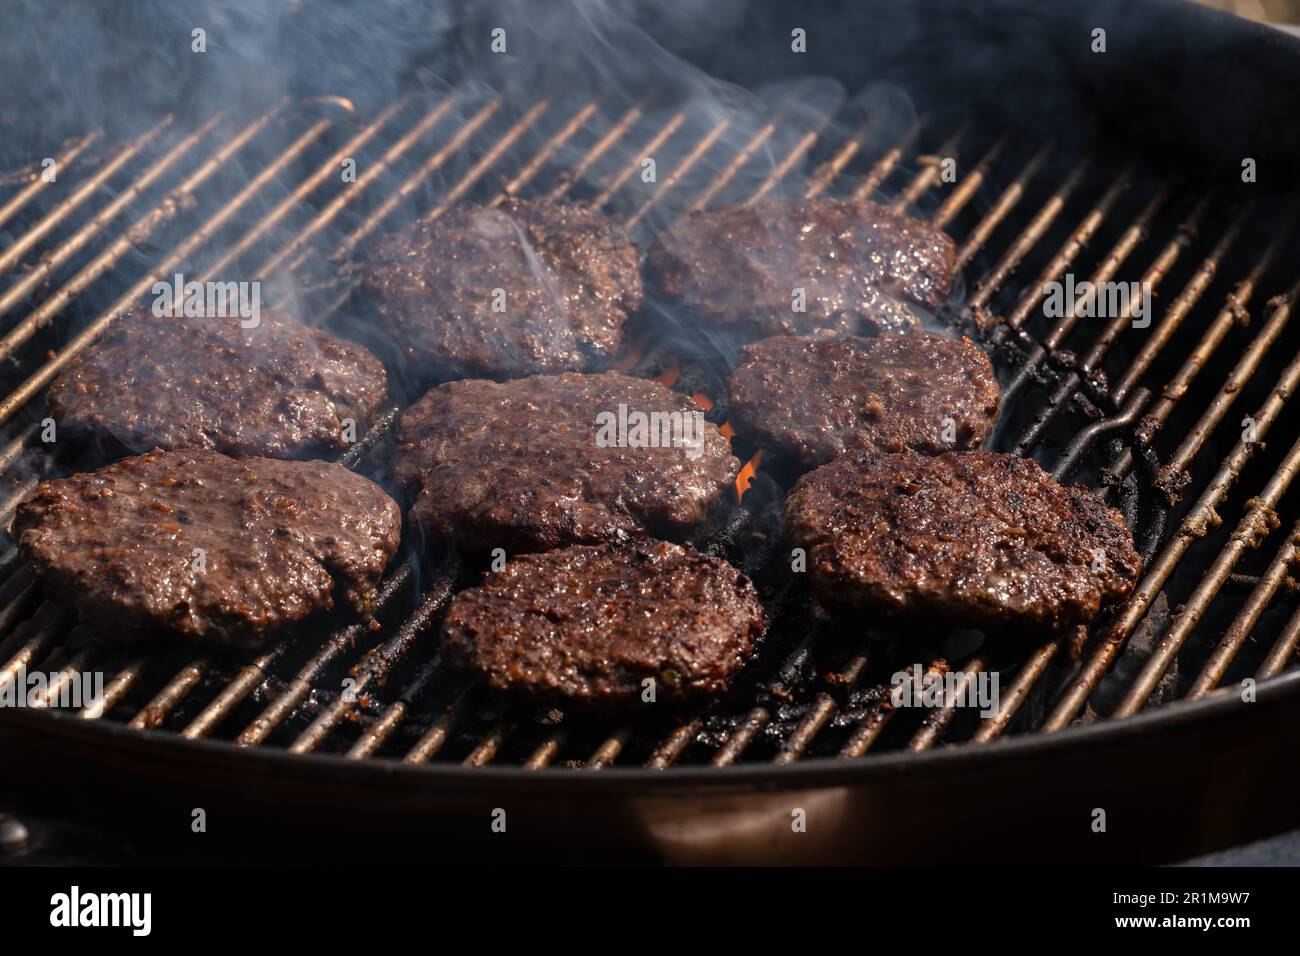 Grilling burgers on barbecue BBQ grill on hot charcoal. Homemade burger patties are being roasted on grill bars. Stock Photo